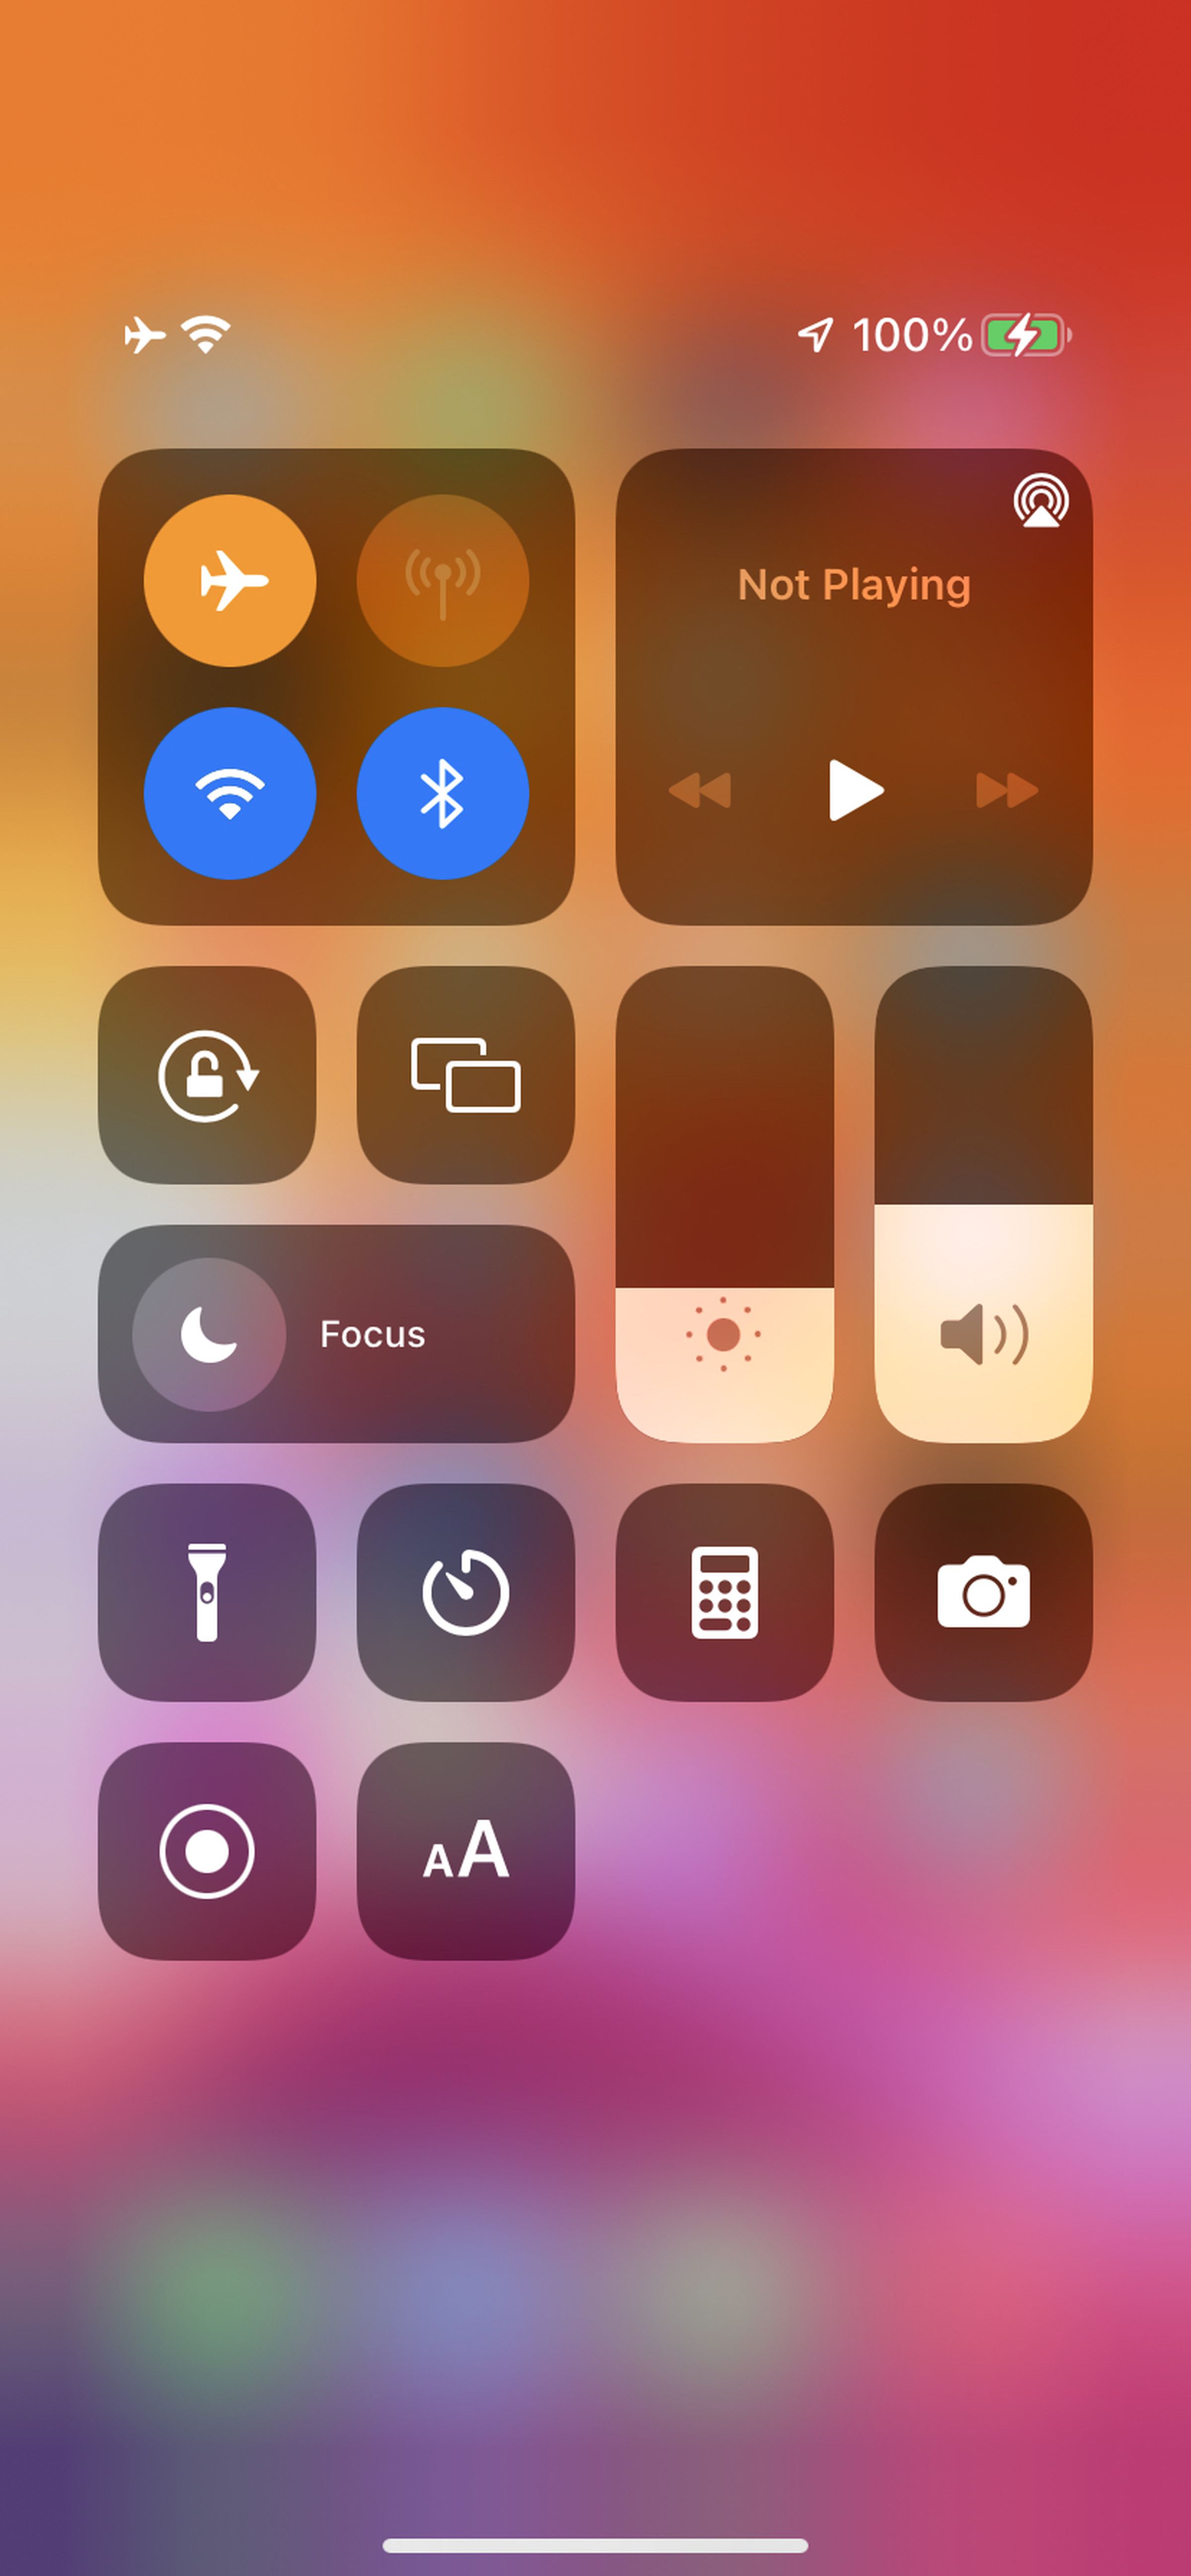 You’ll find your new Focus button in the Control Center.